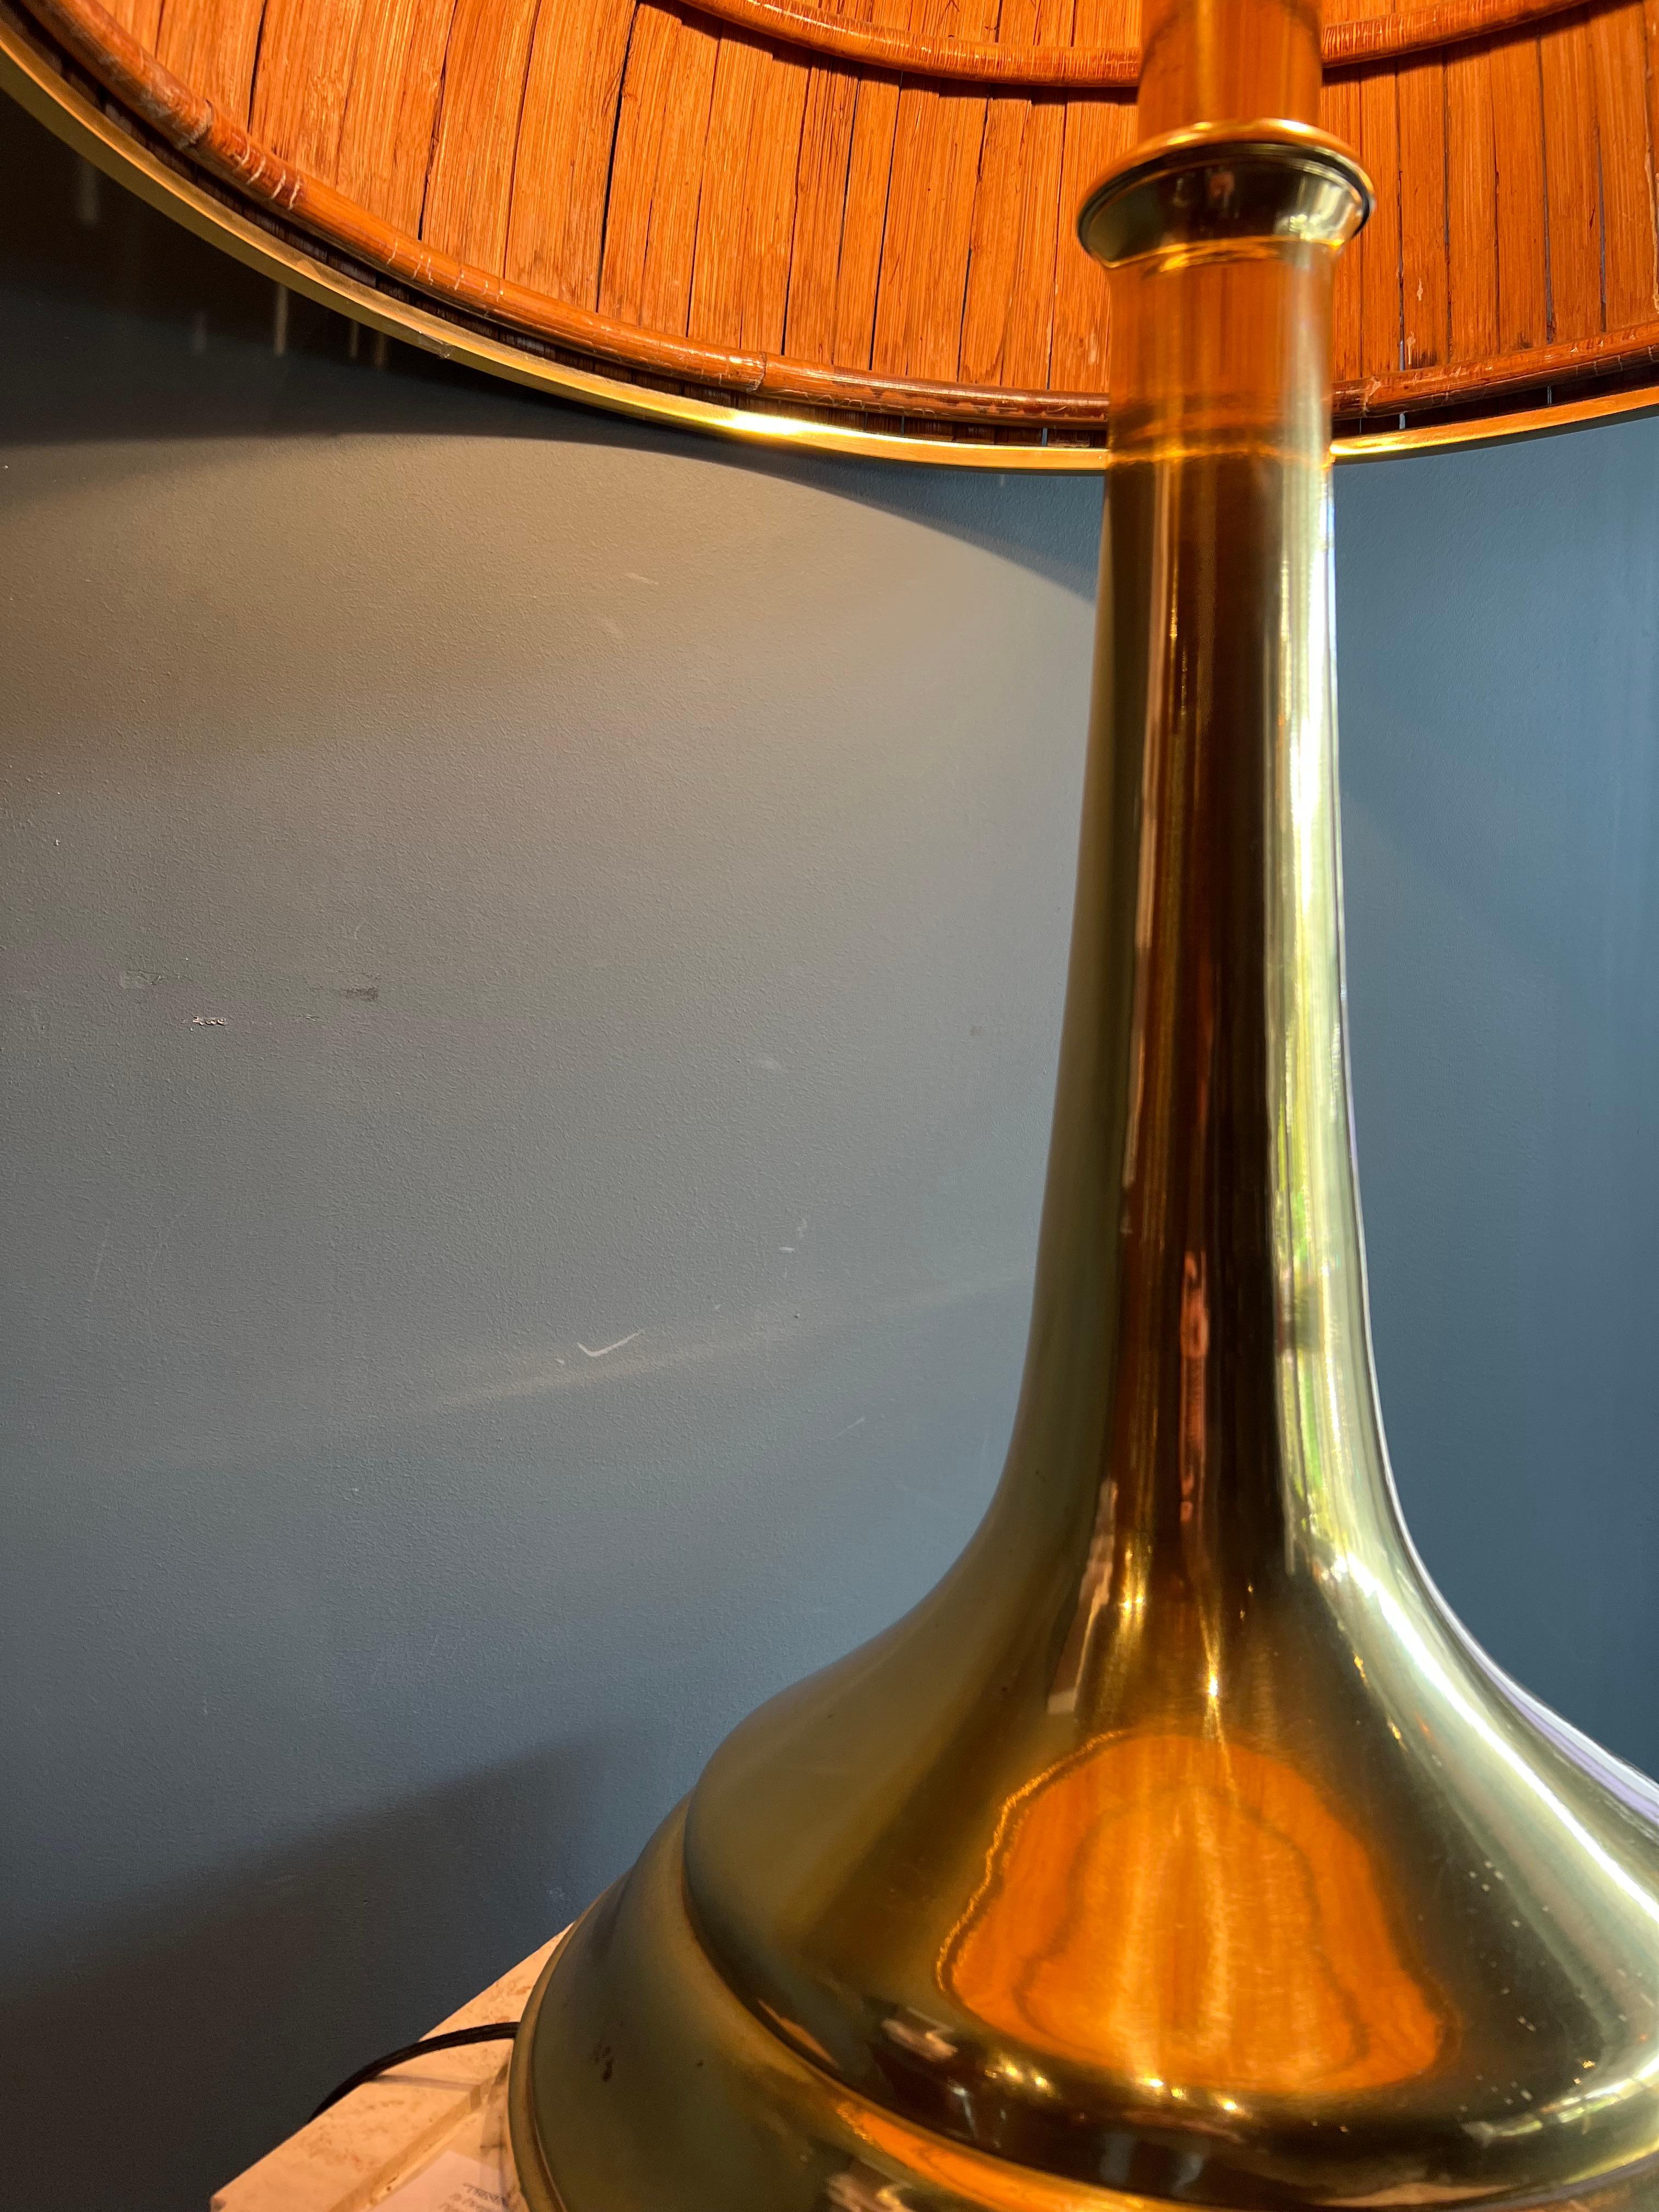 Brass Gabriella Crespi Large Fungo Table Lamp, Rising Sun Series, 1973, Italy For Sale